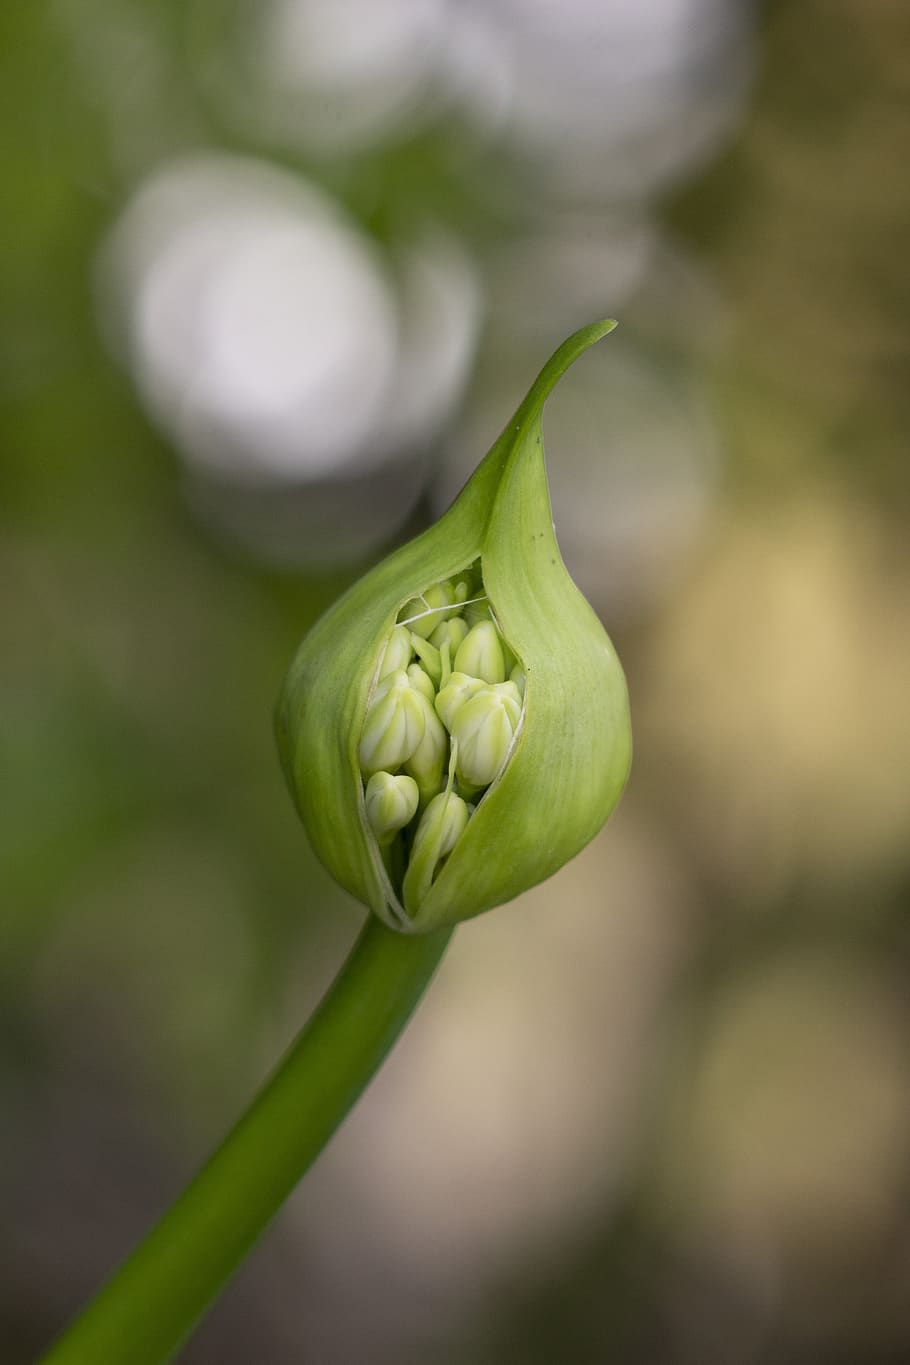 pod, flower, agapanthus, bokeh, green color, focus on foreground